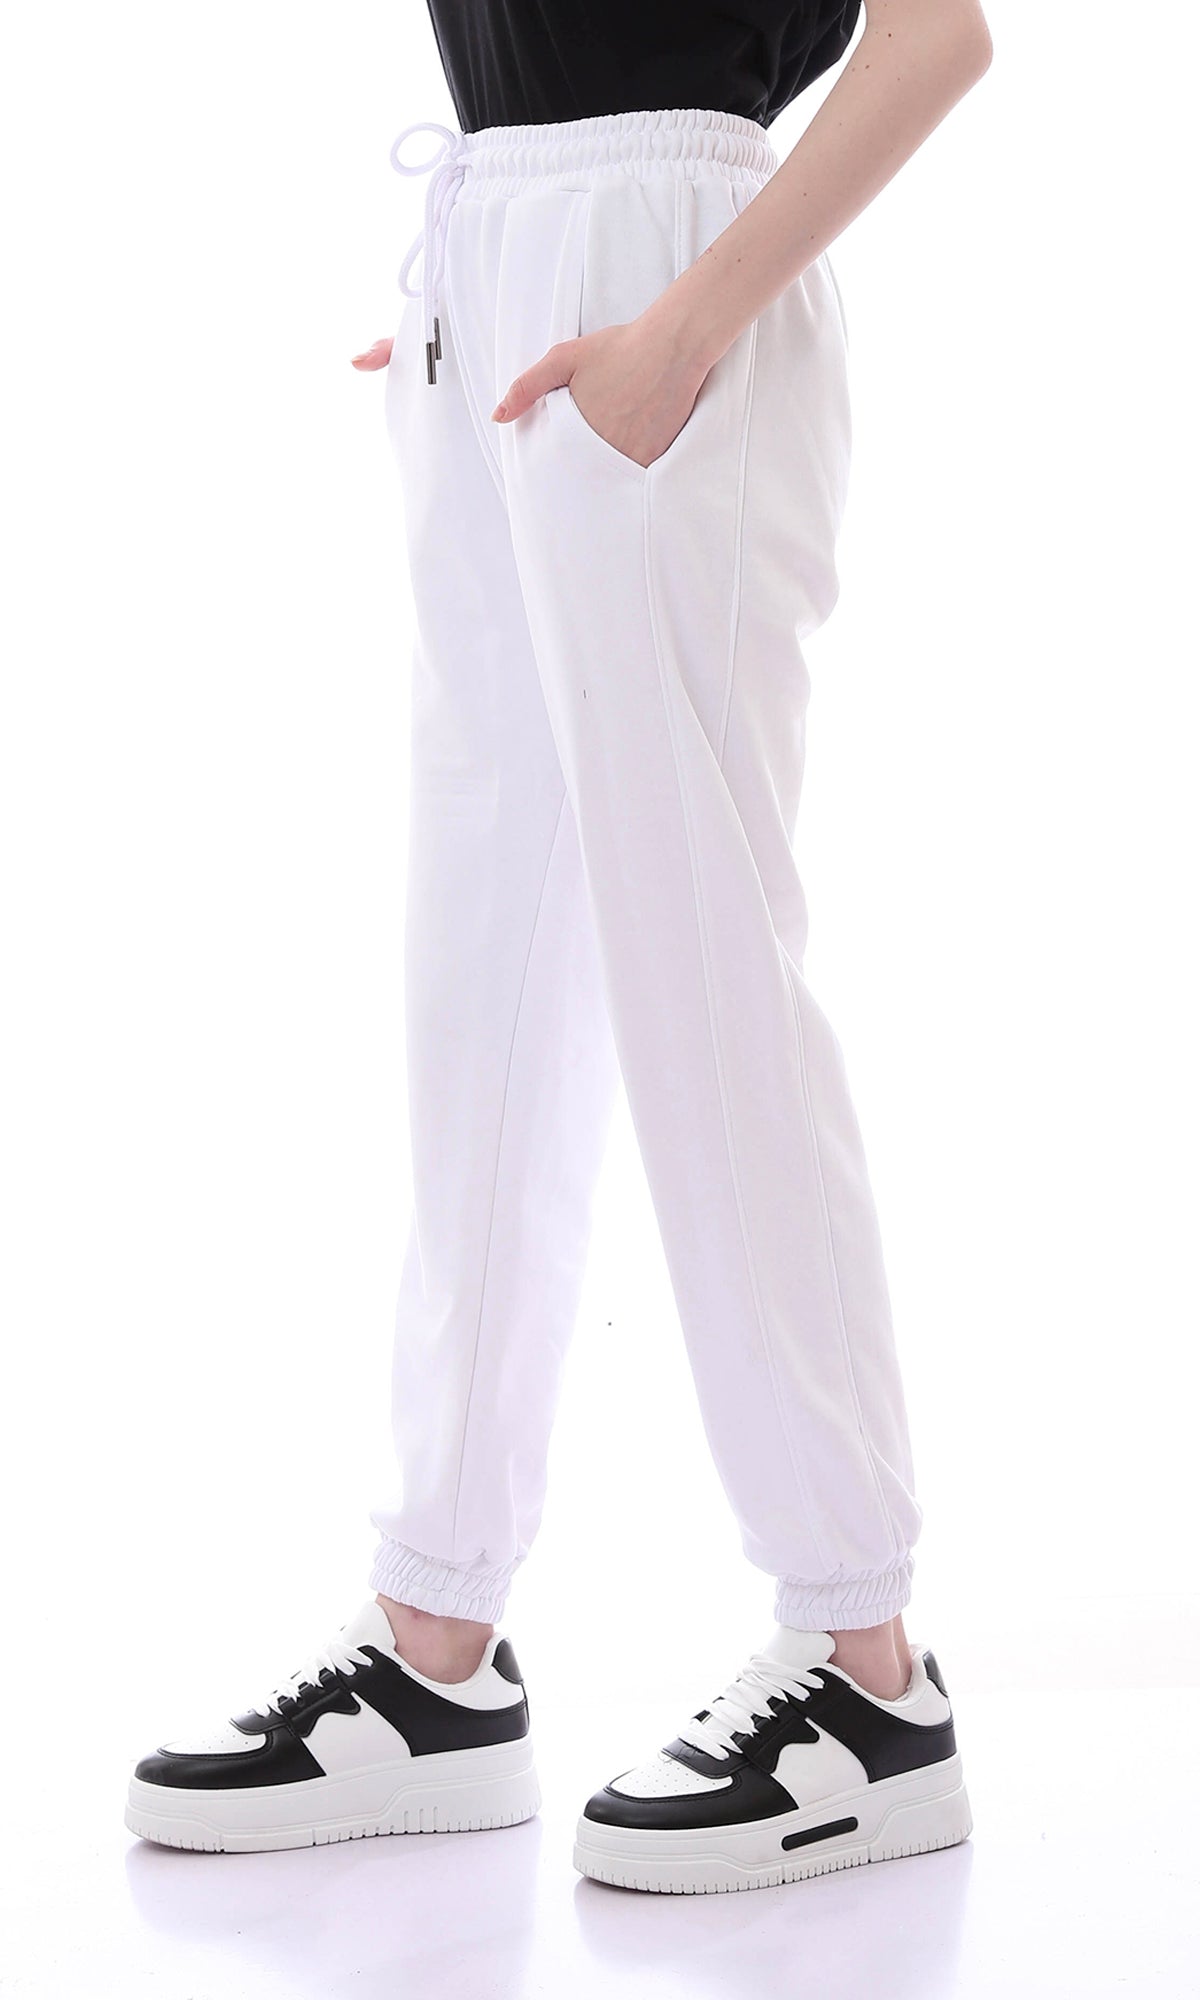 O165844 Comfy Solid Off-White Sweatpants With Elastic Waist Drawstring